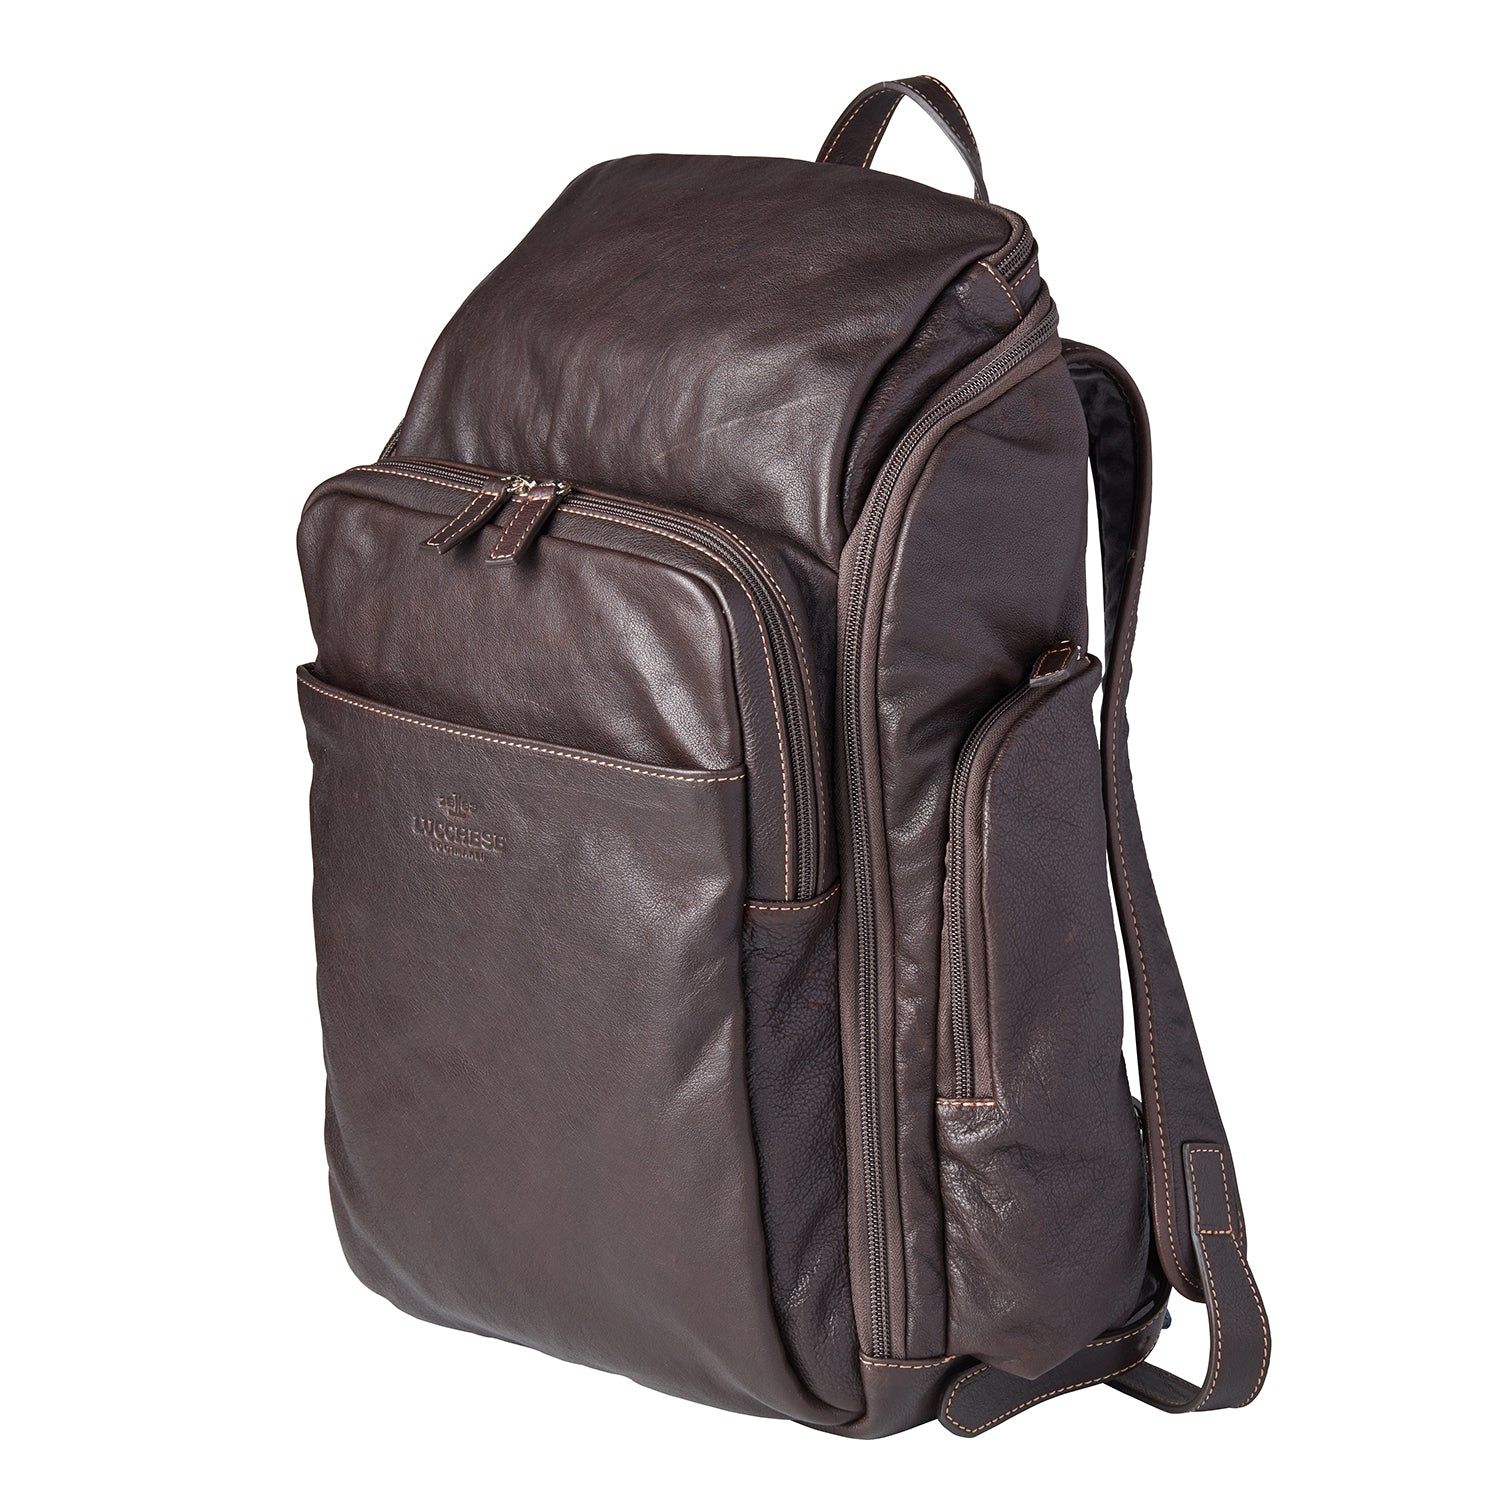 10 Best Men's Backpacks For Work that are Professional and Stylish |  Backpackies